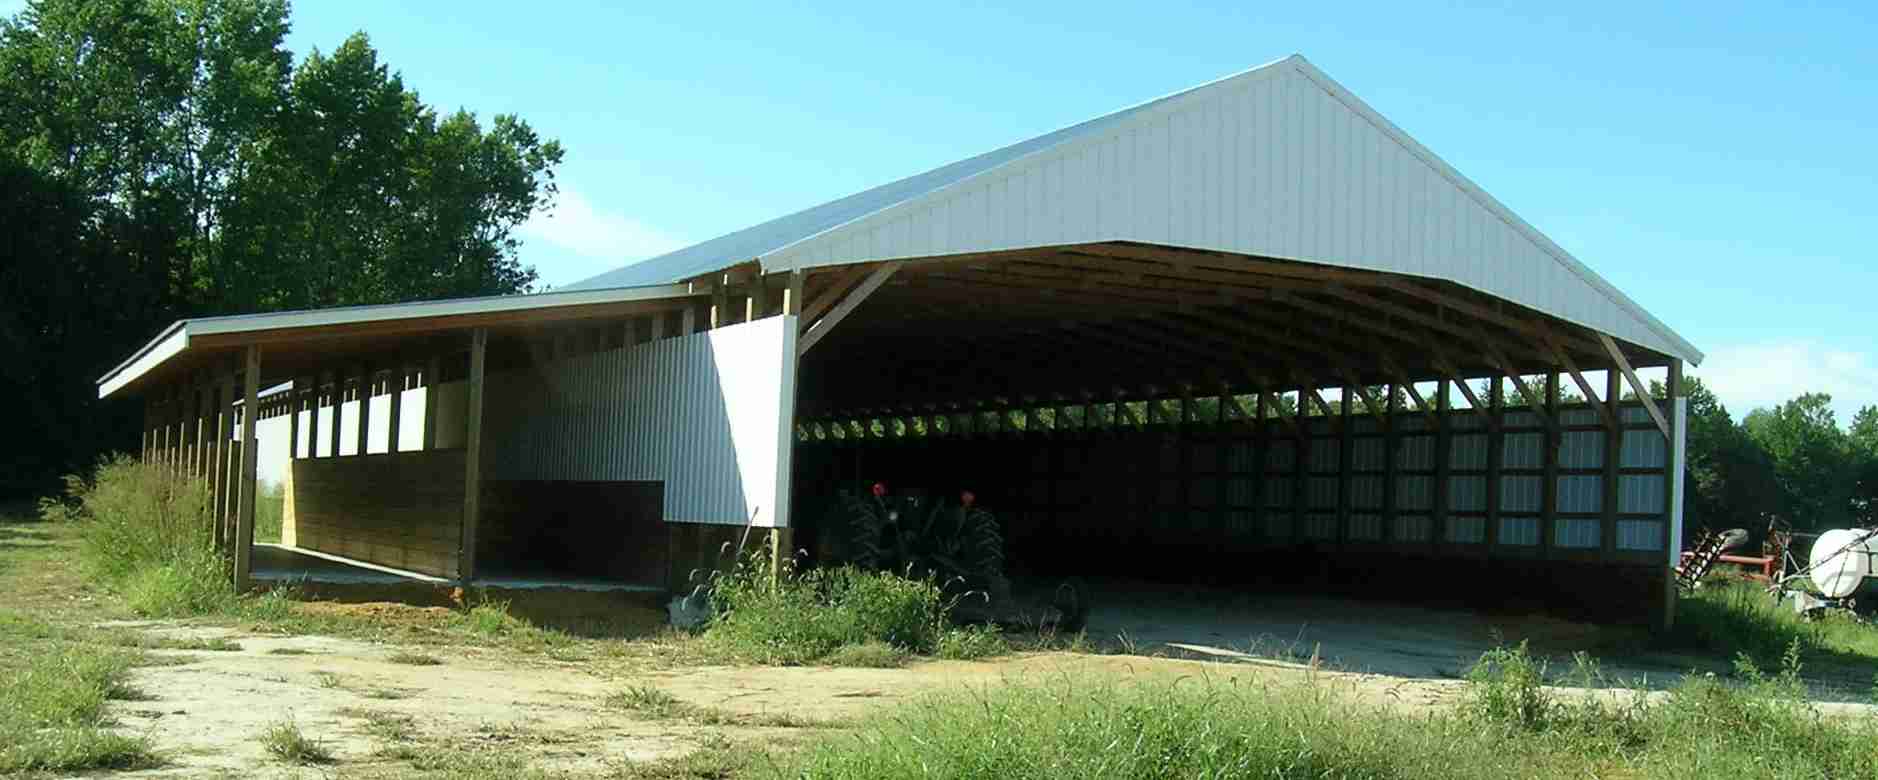 NRCS Approved Manure Storage Shed, front view.